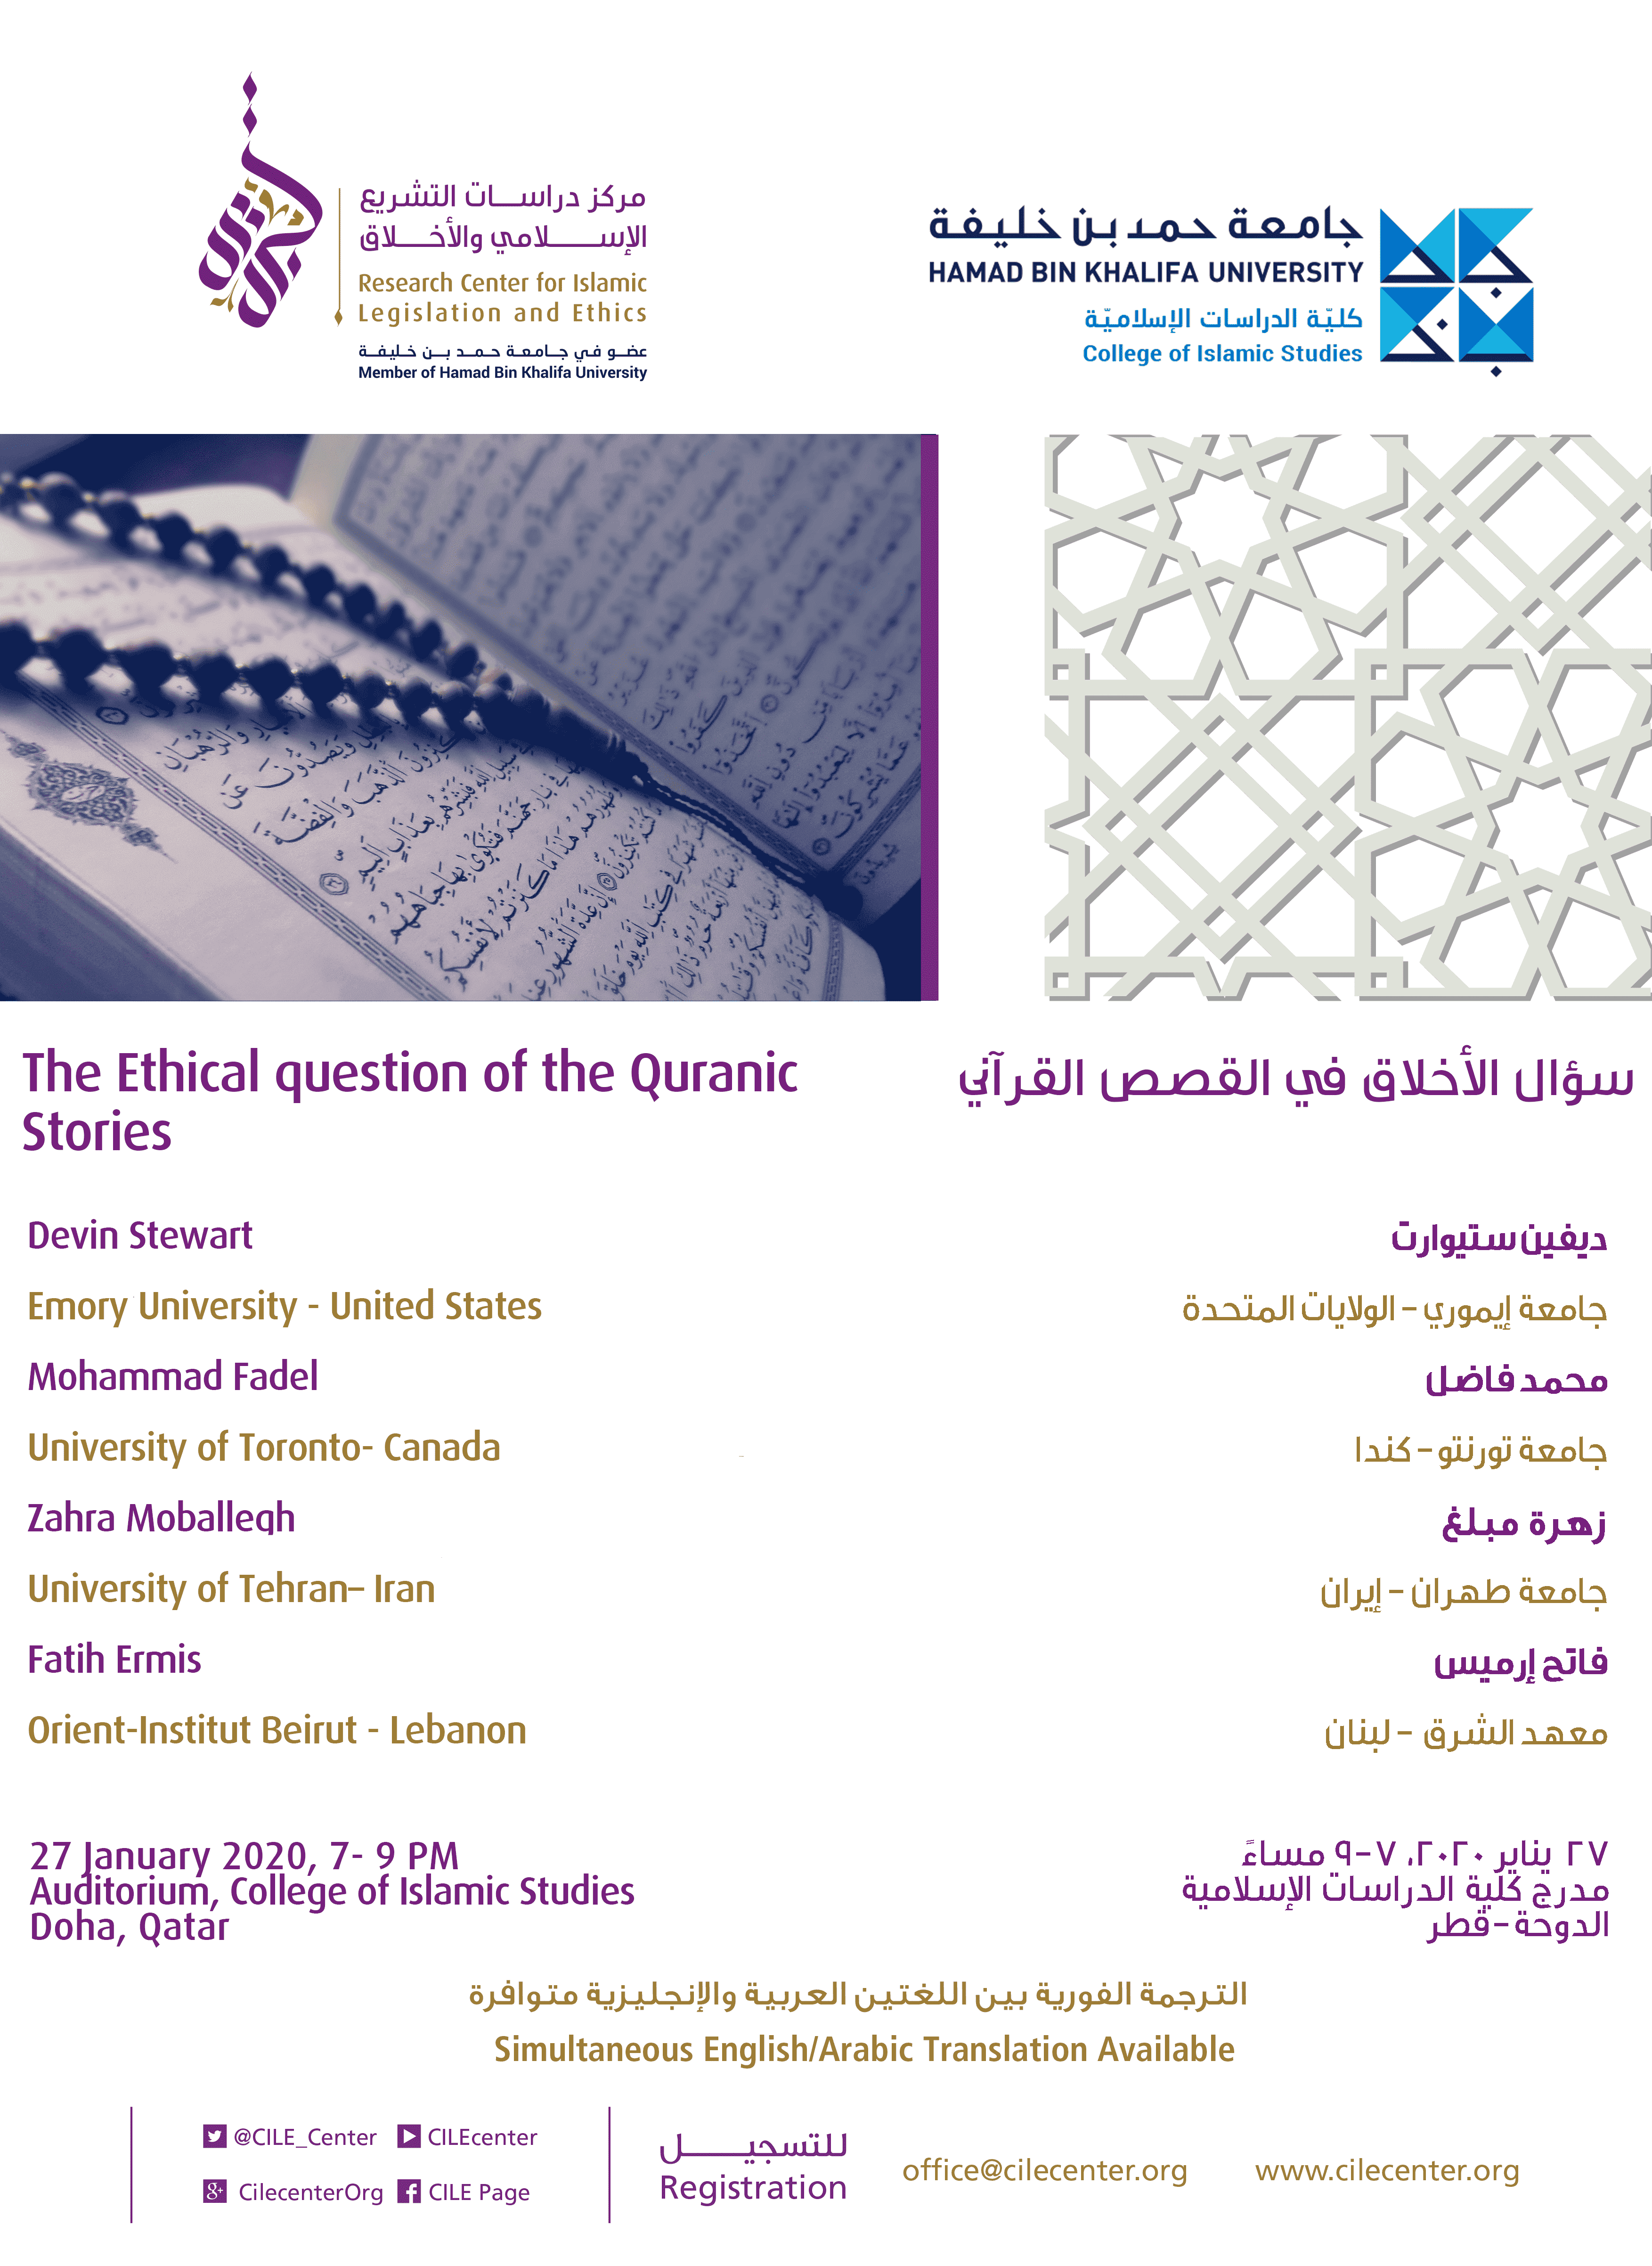 01/2020 Lecture: The Ethical question of the Quranic Stories